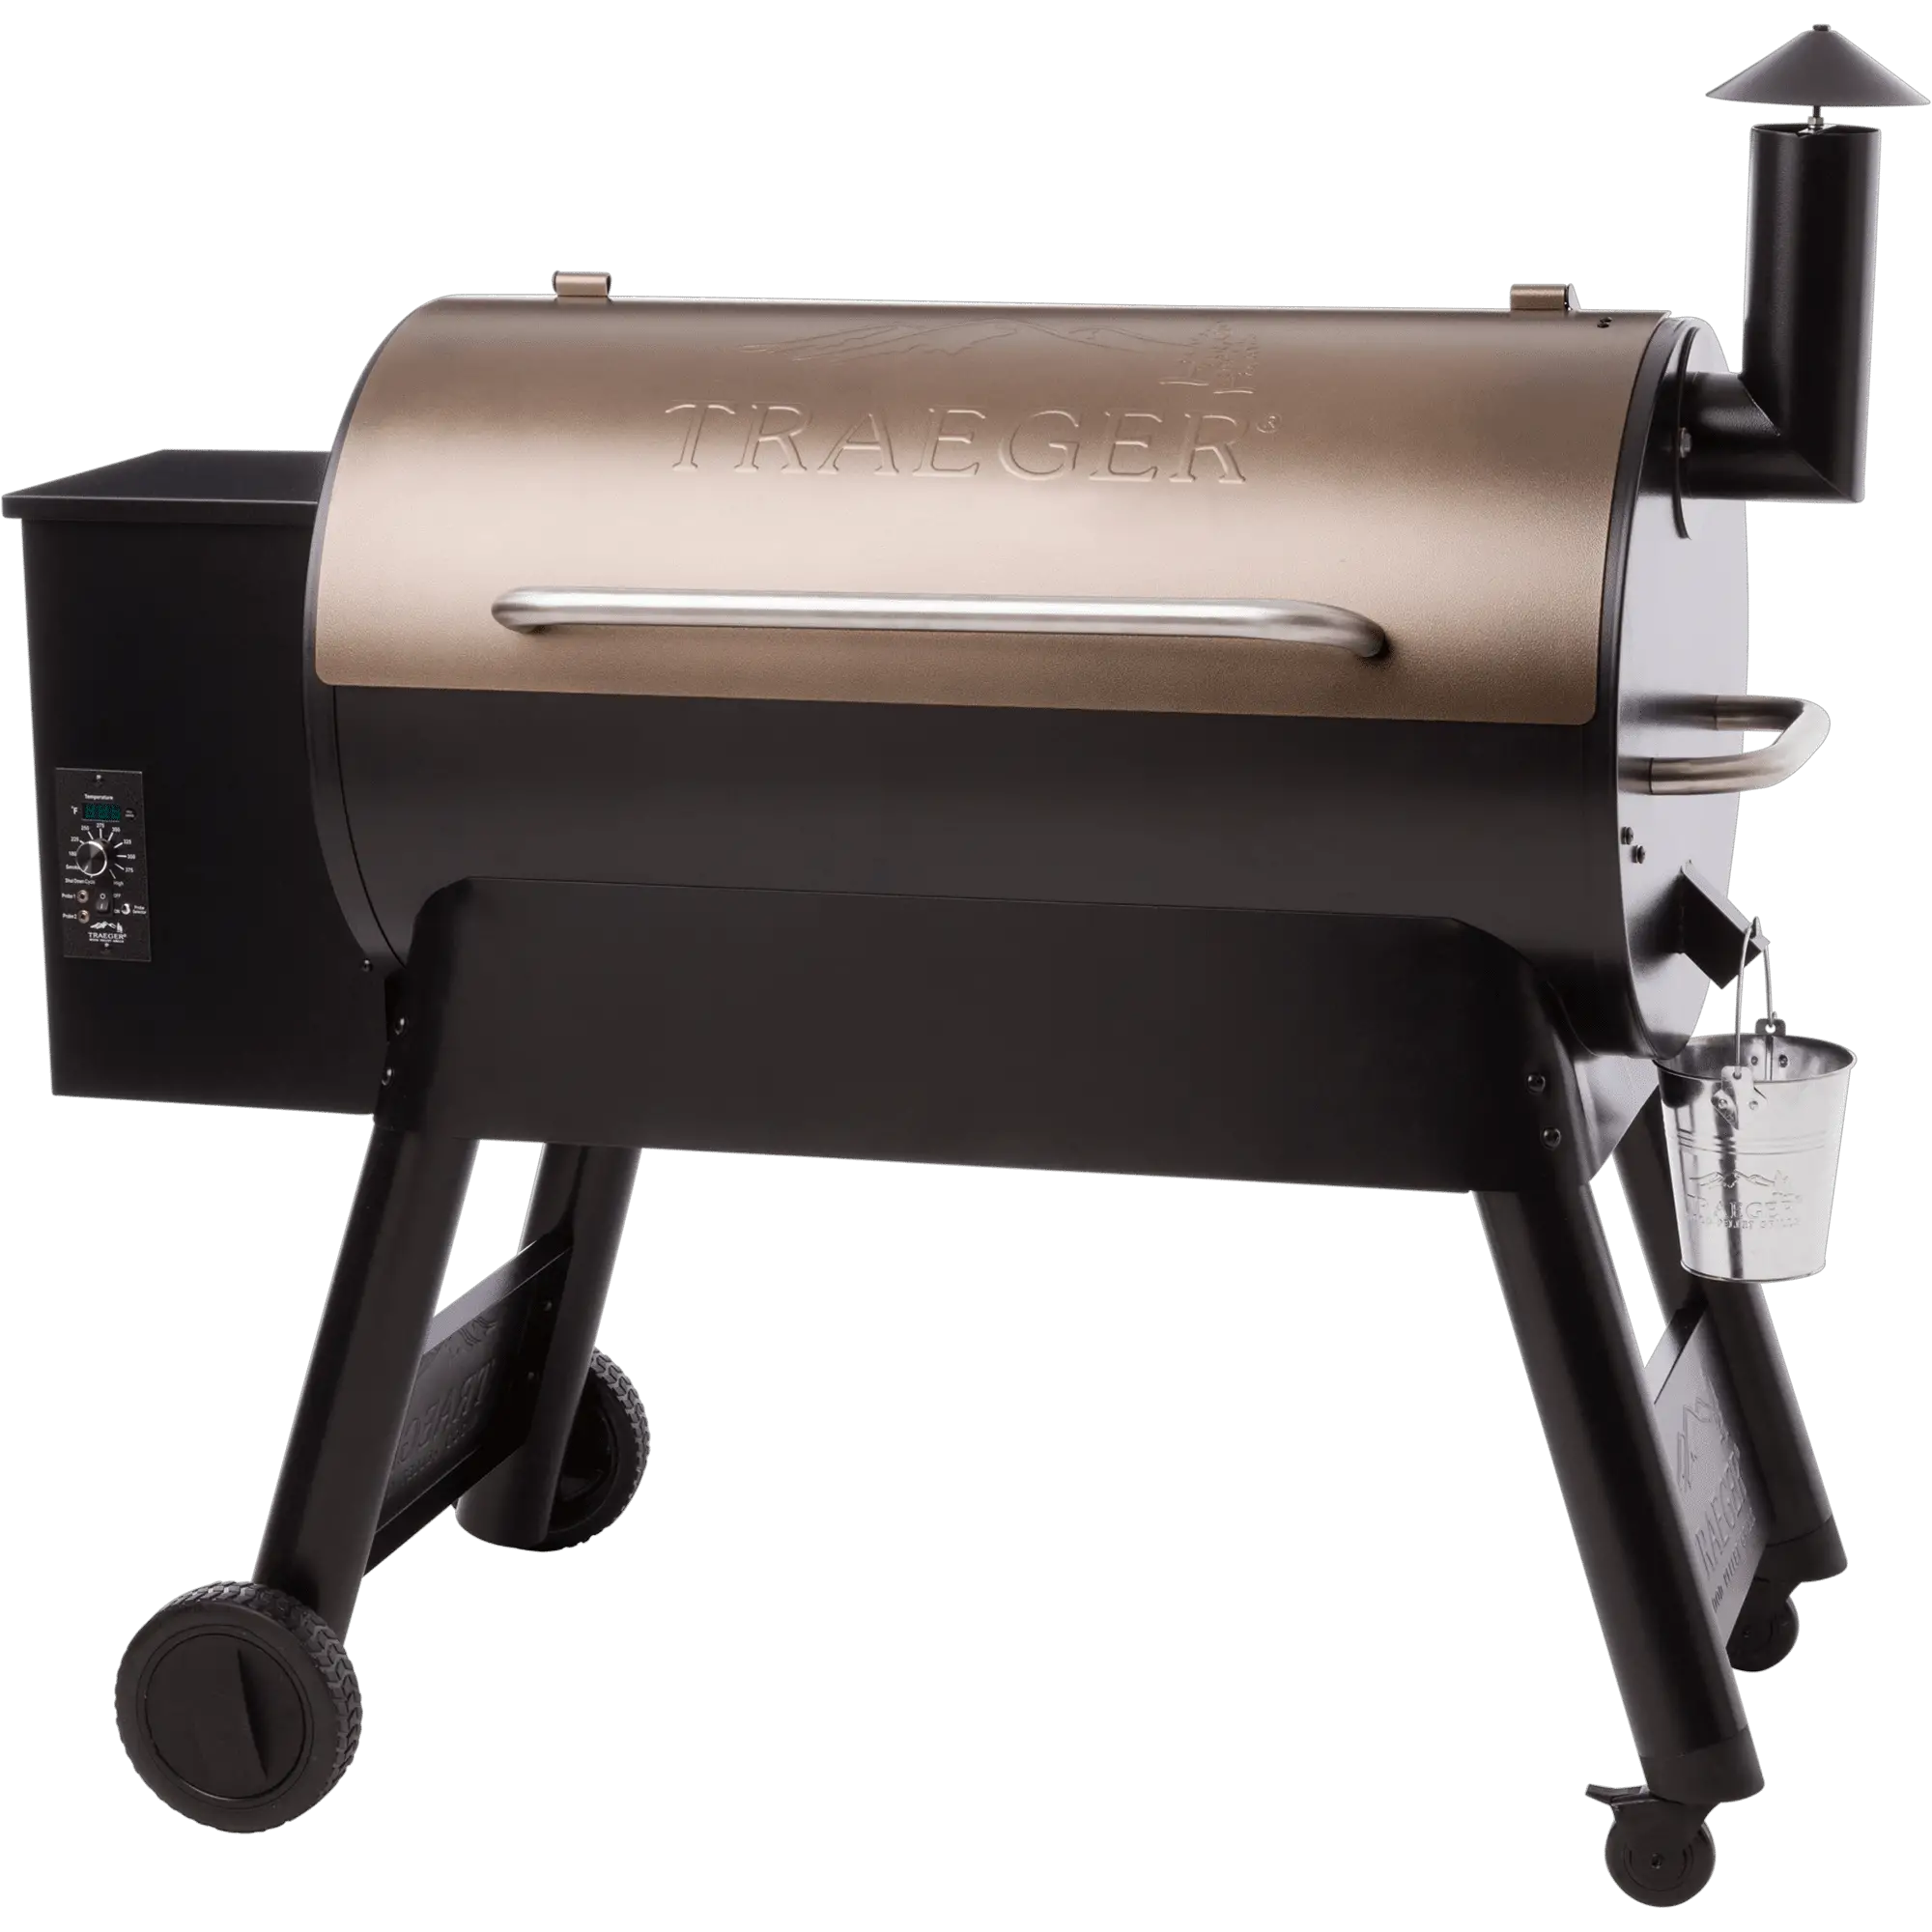 Traeger Grills Pro Series 34 Pellet Grill Review And Rating